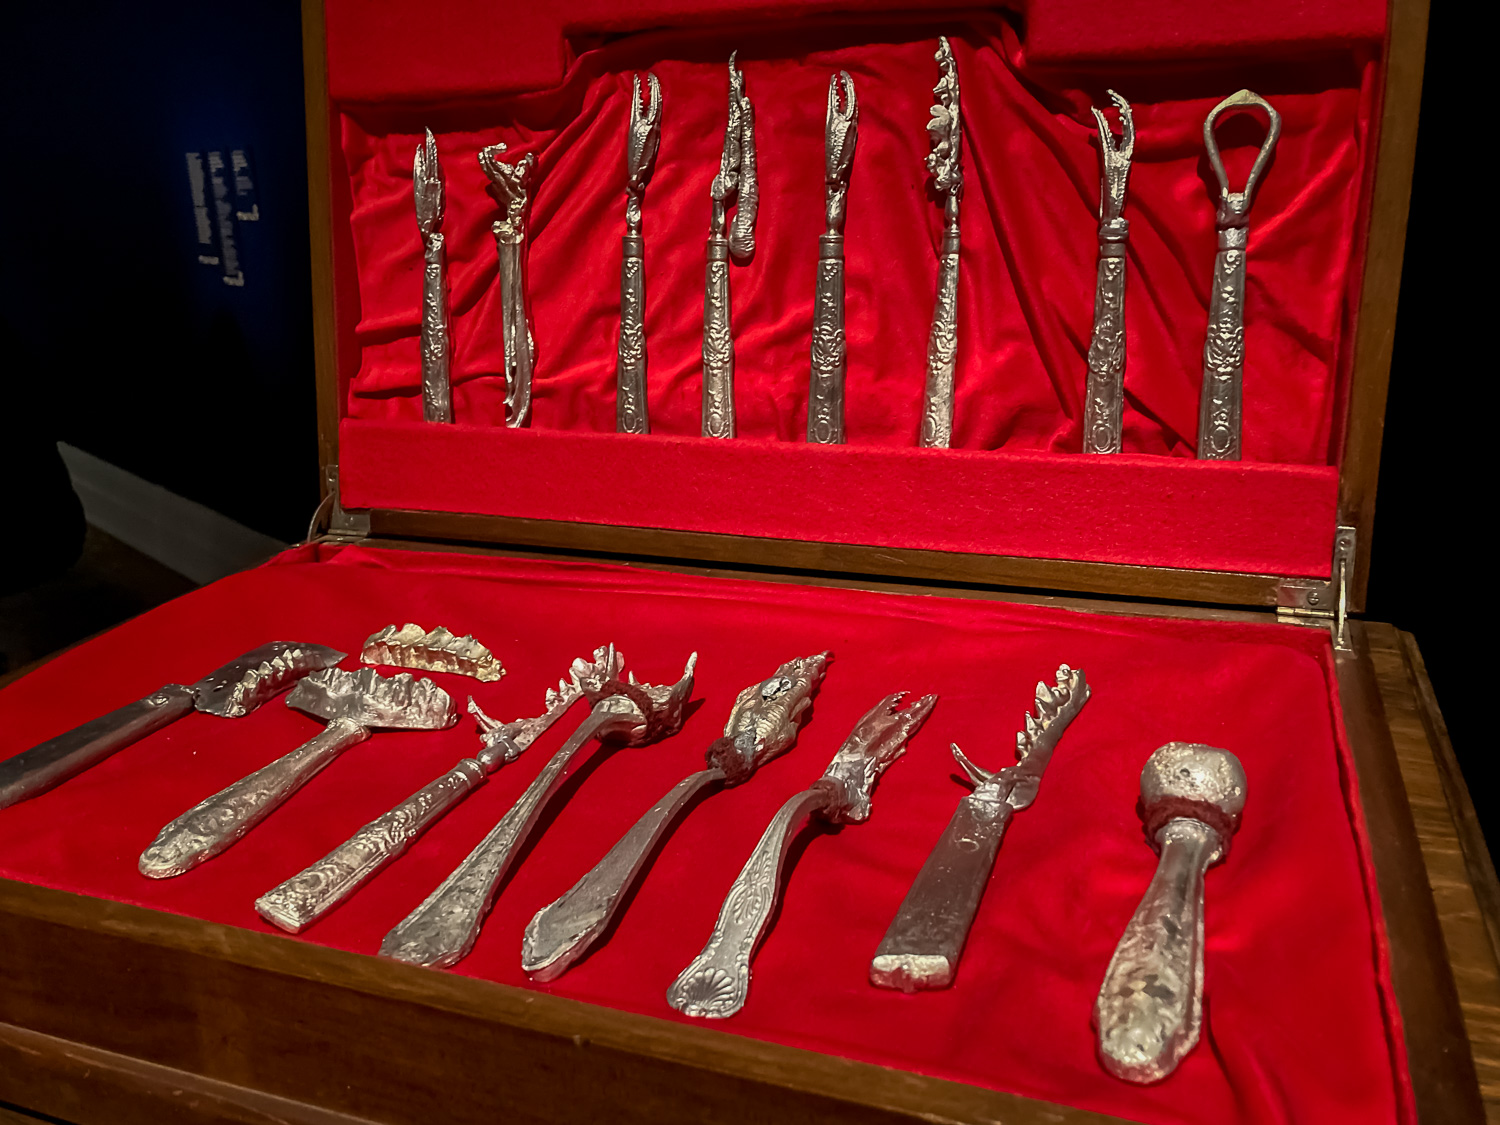 A silver cutlery set in a red-lined case. The implements resemble different animal teeth and claws